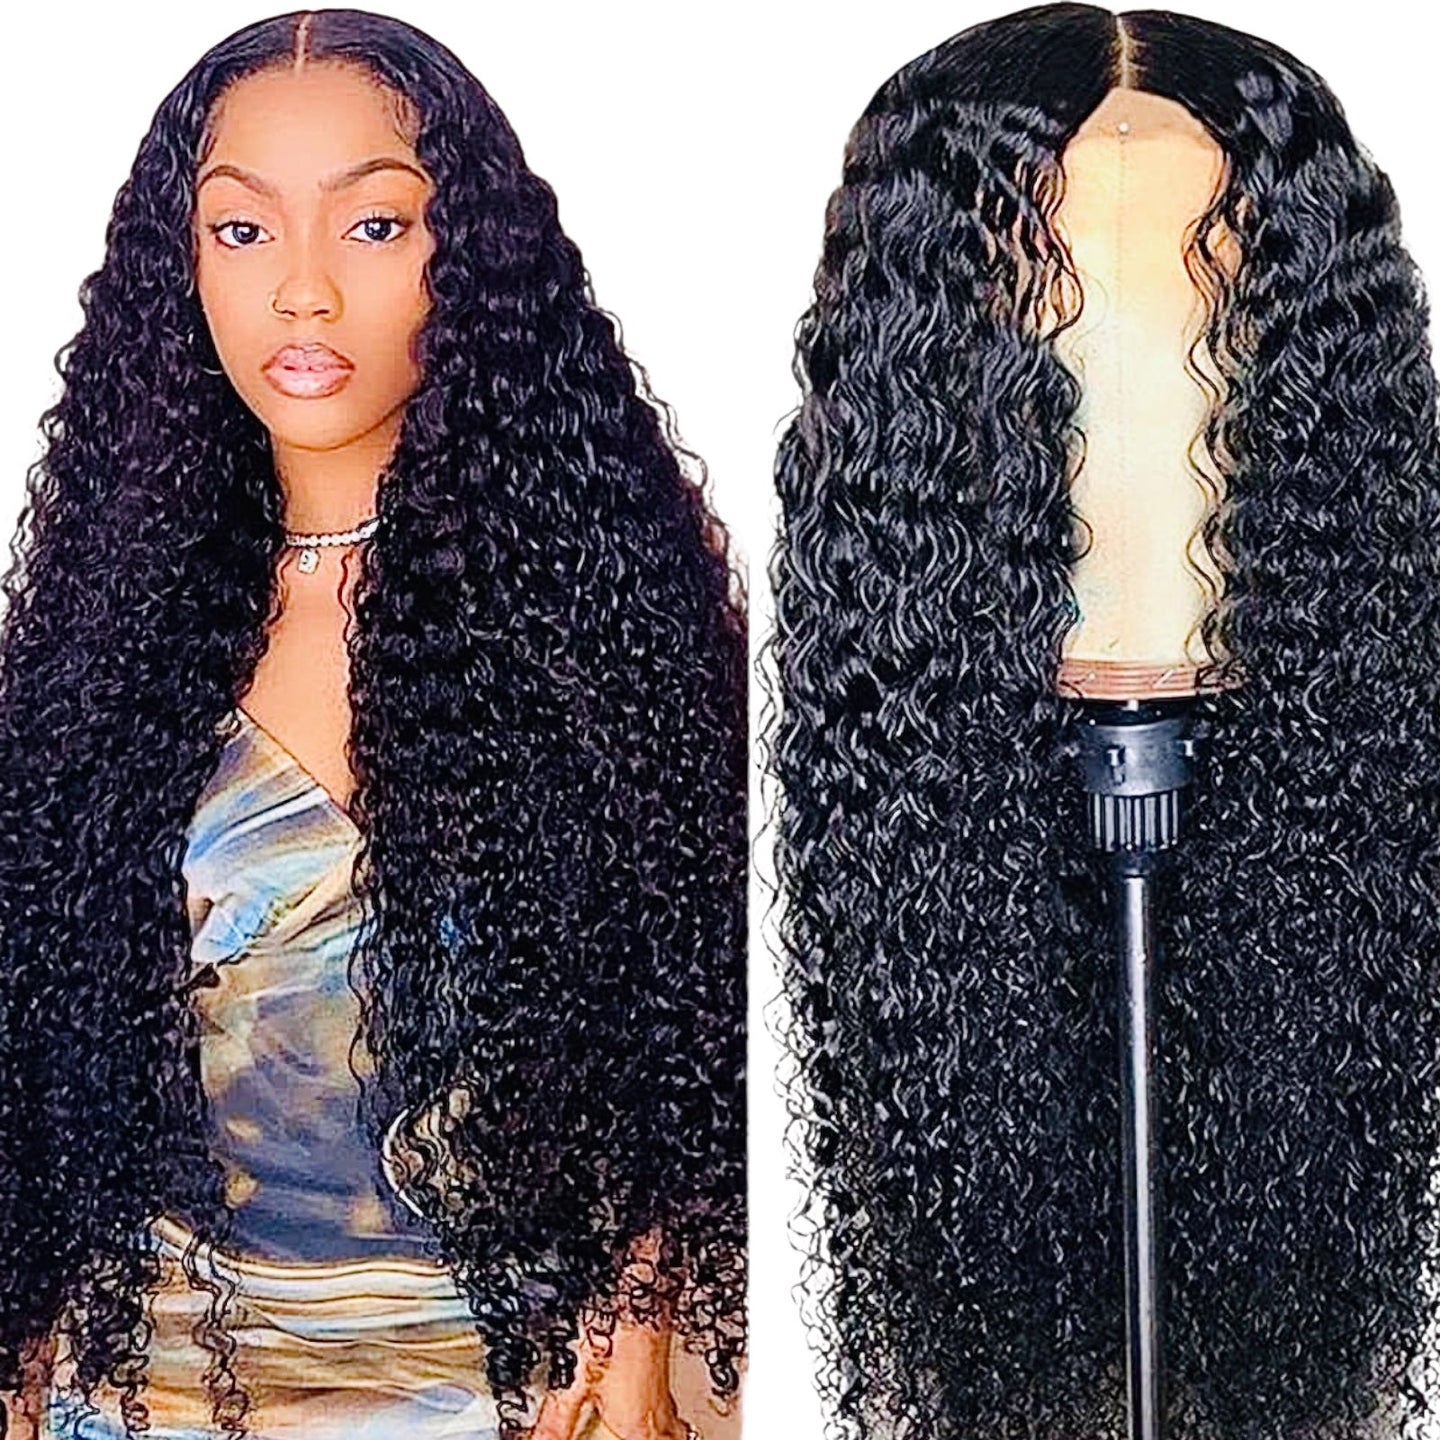 UNice Body Wave Fake leather lace hair cap wigs with Bleached Knots